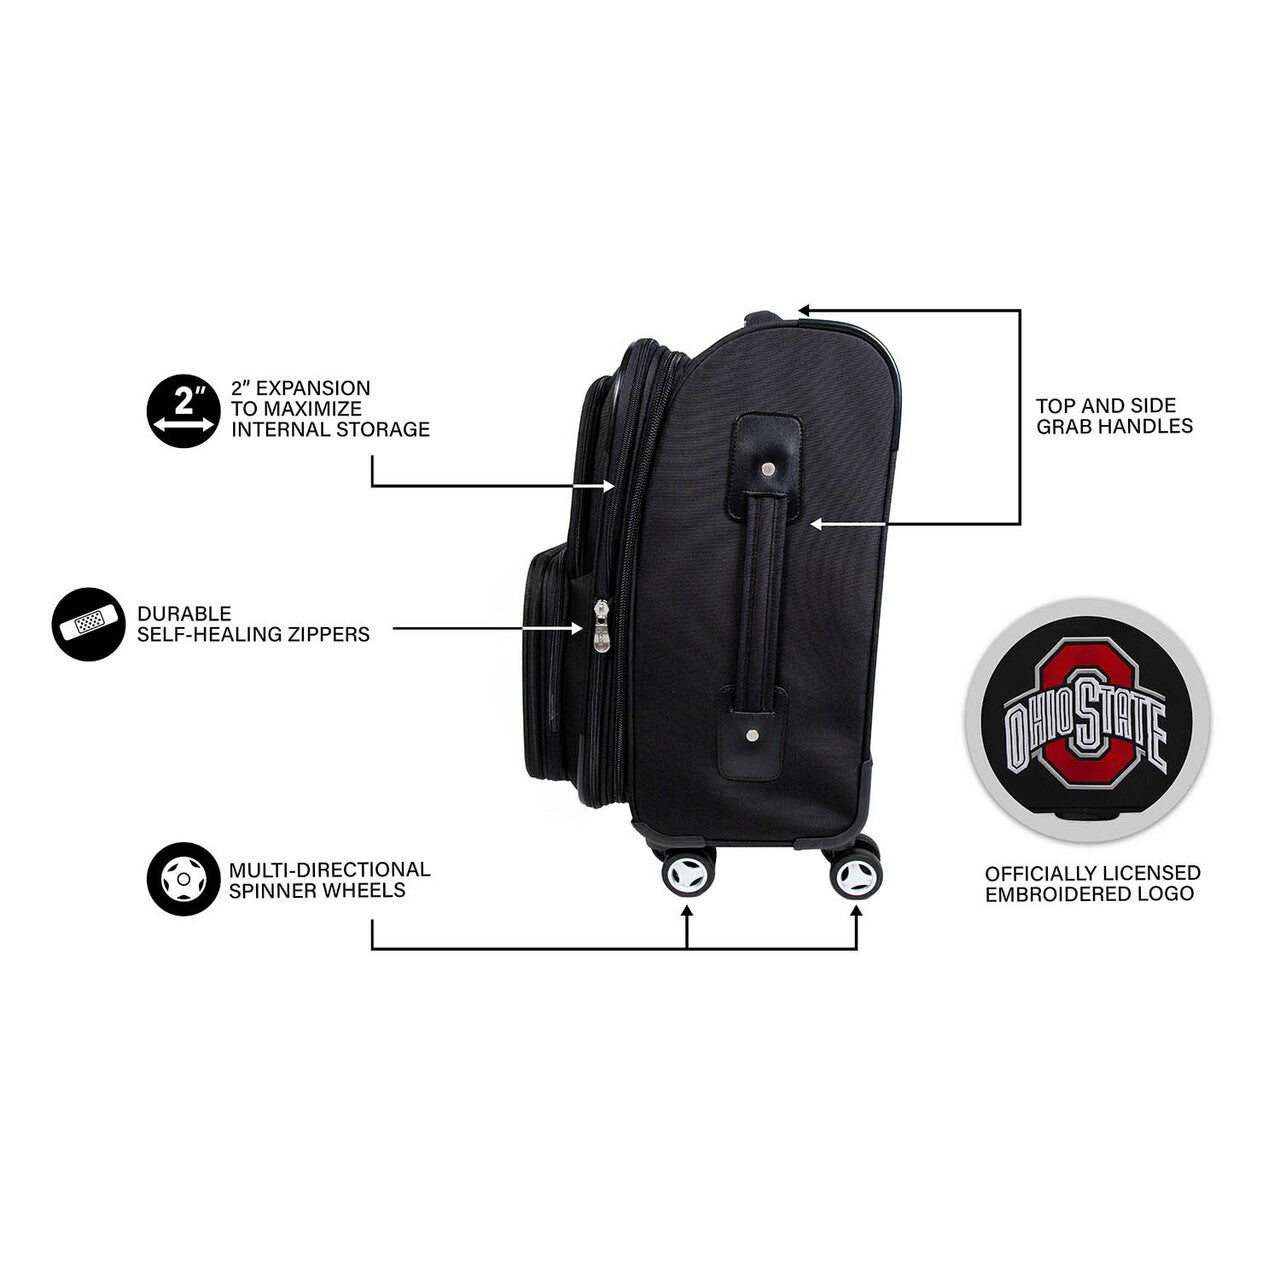 Gonzaga Bulldogs 21" Carry-on Spinner Luggage